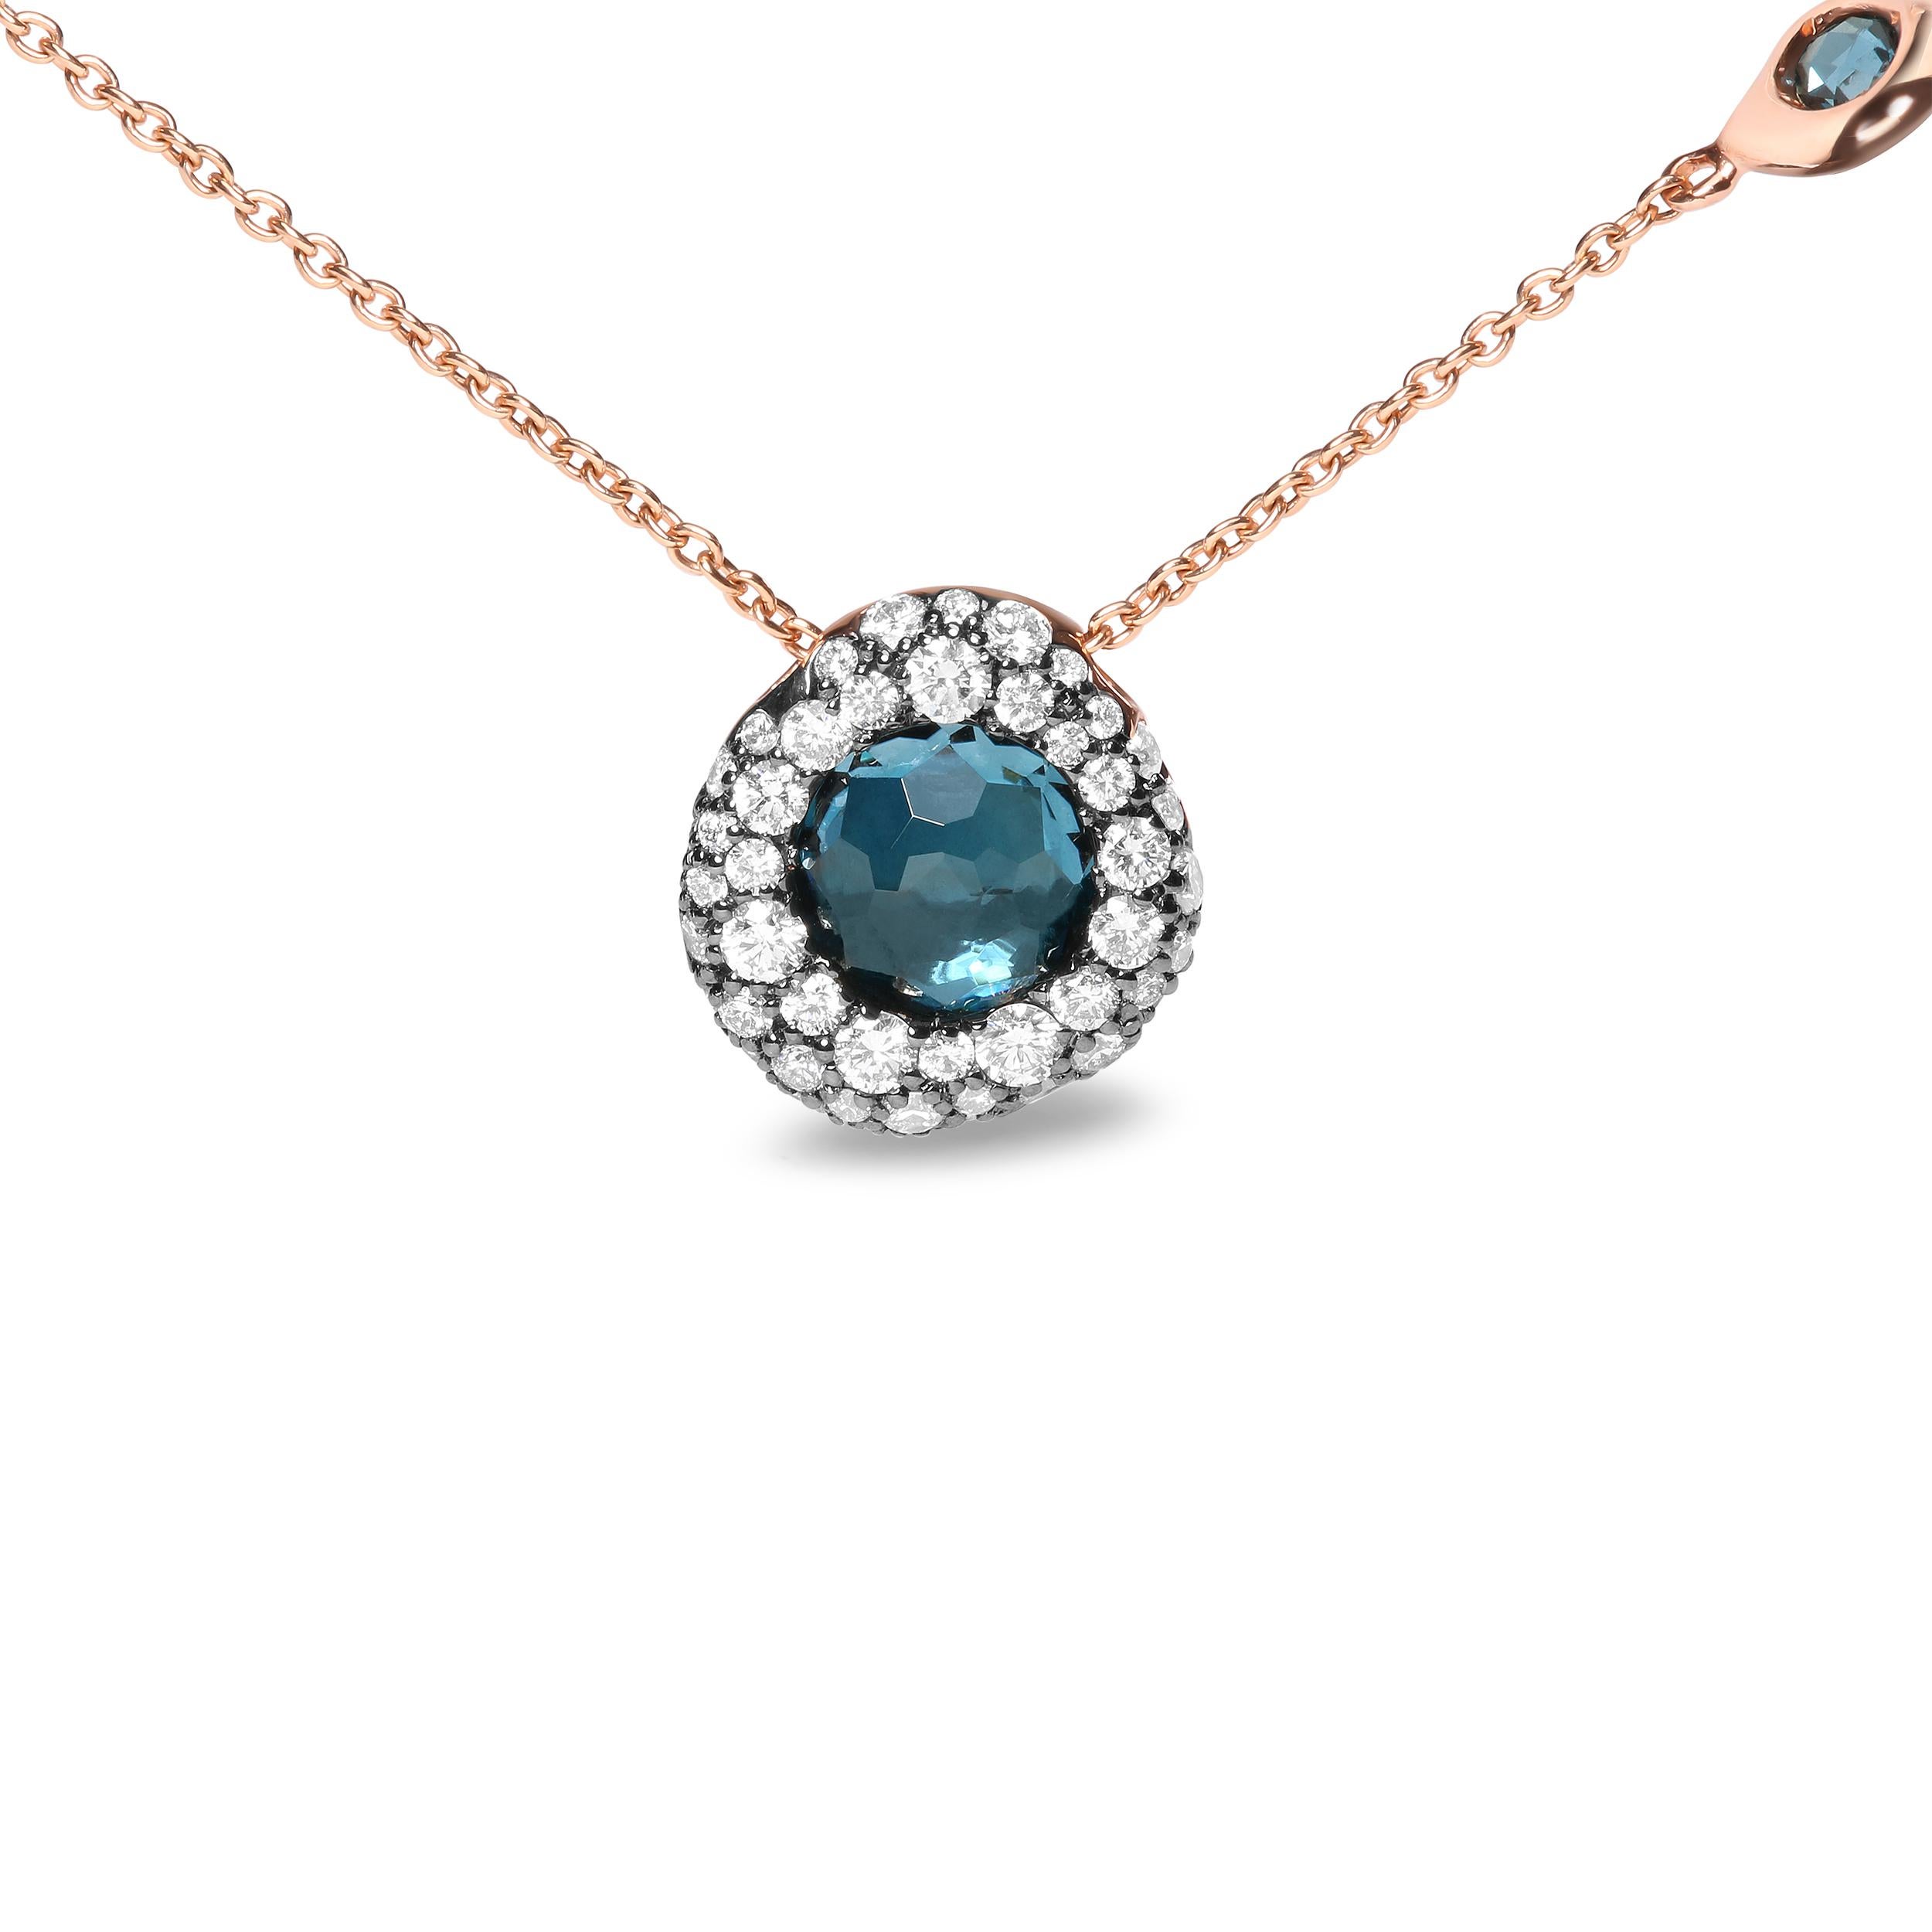 This exceptional 18k rose gold station necklace features a natural 7.7mm round bezel-set topaz in a vivid heat-treated  London blue hue that serves as an eye-catching centerpiece. A cluster of round, bezel-set diamonds encircles this crisply colored